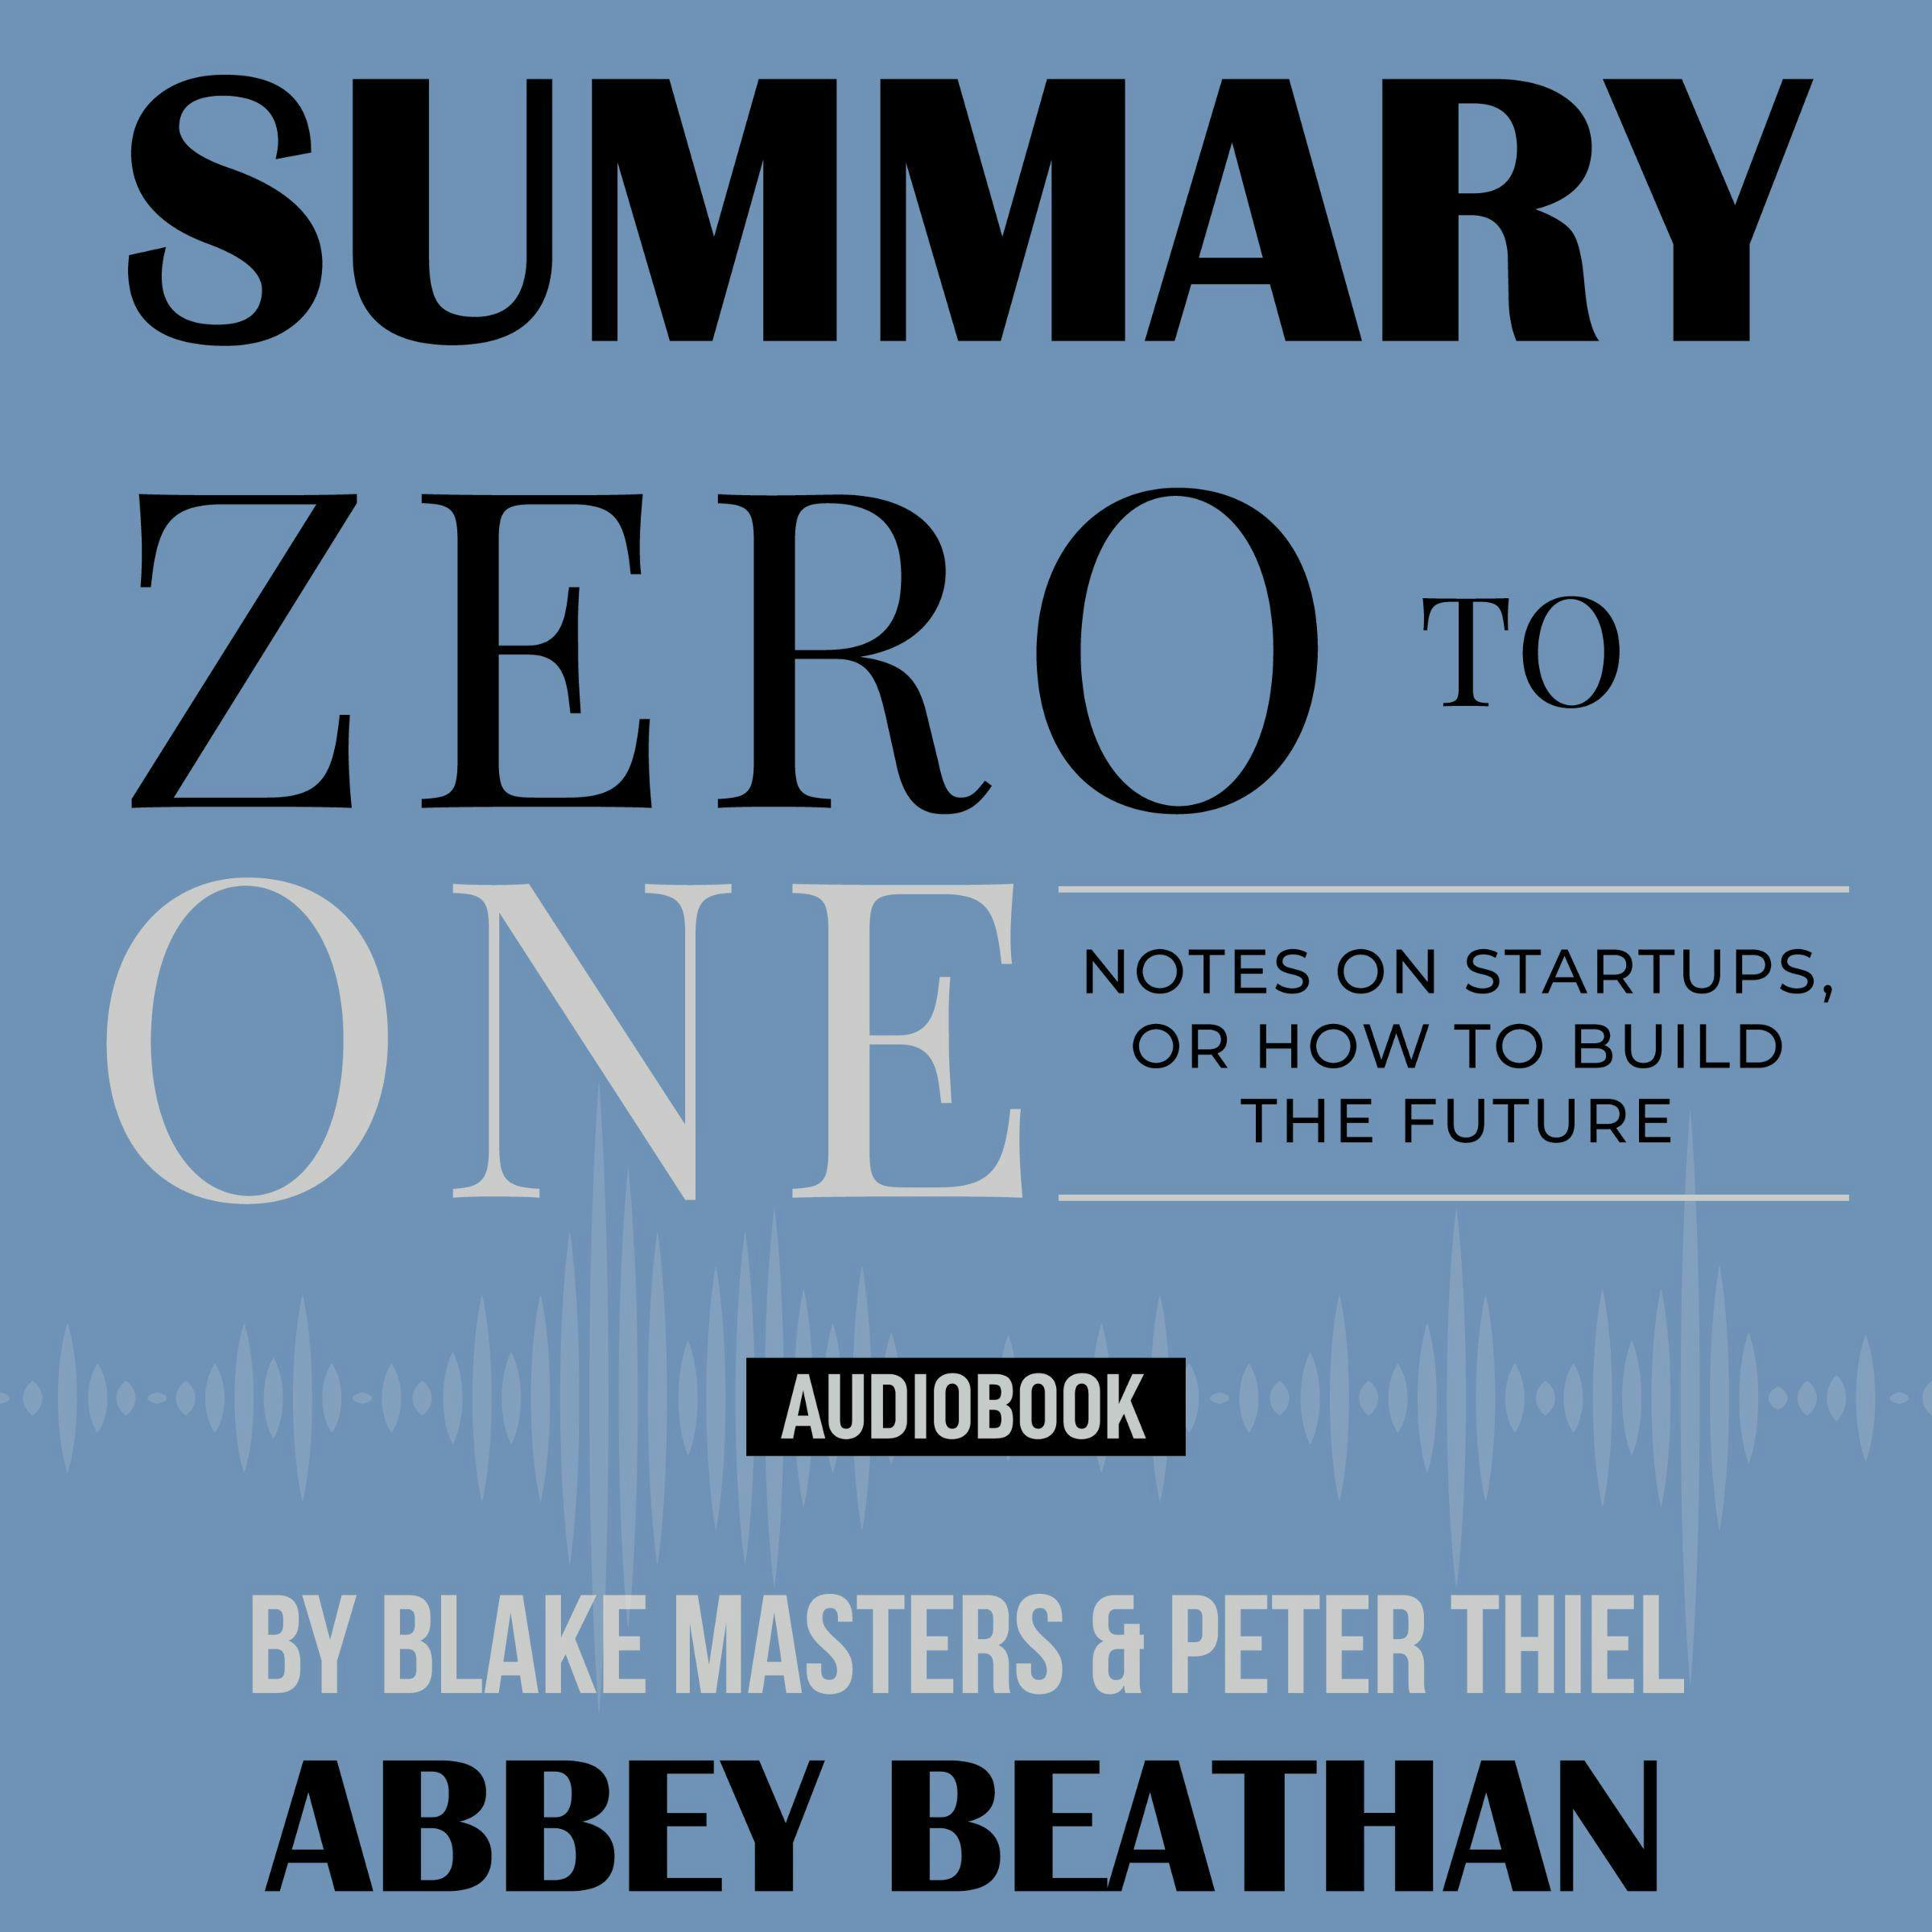 Zero to One: Notes on Startups, or How to Build the Future - By Peter Thiel  